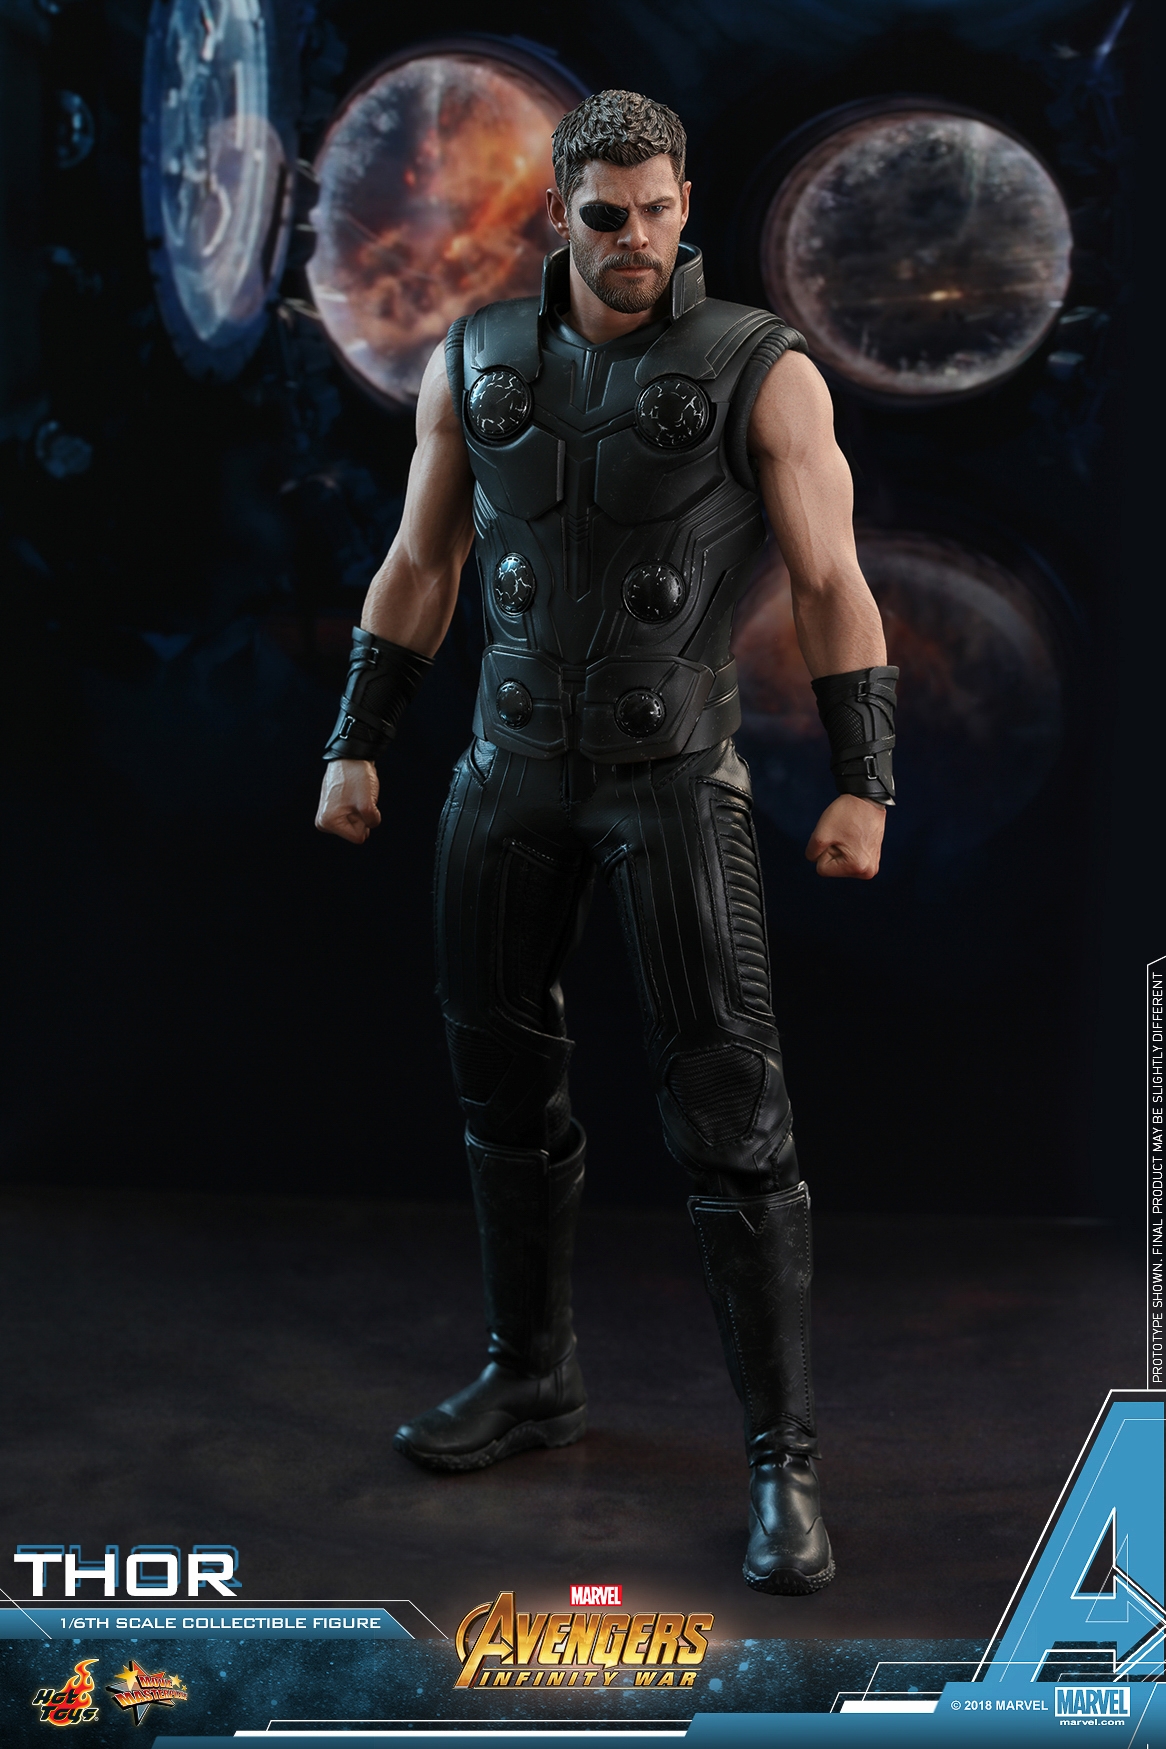 Hot-Toys-MMS474-Avengers-Infinity-War-Thor-Collectible-Figure-004.jpg